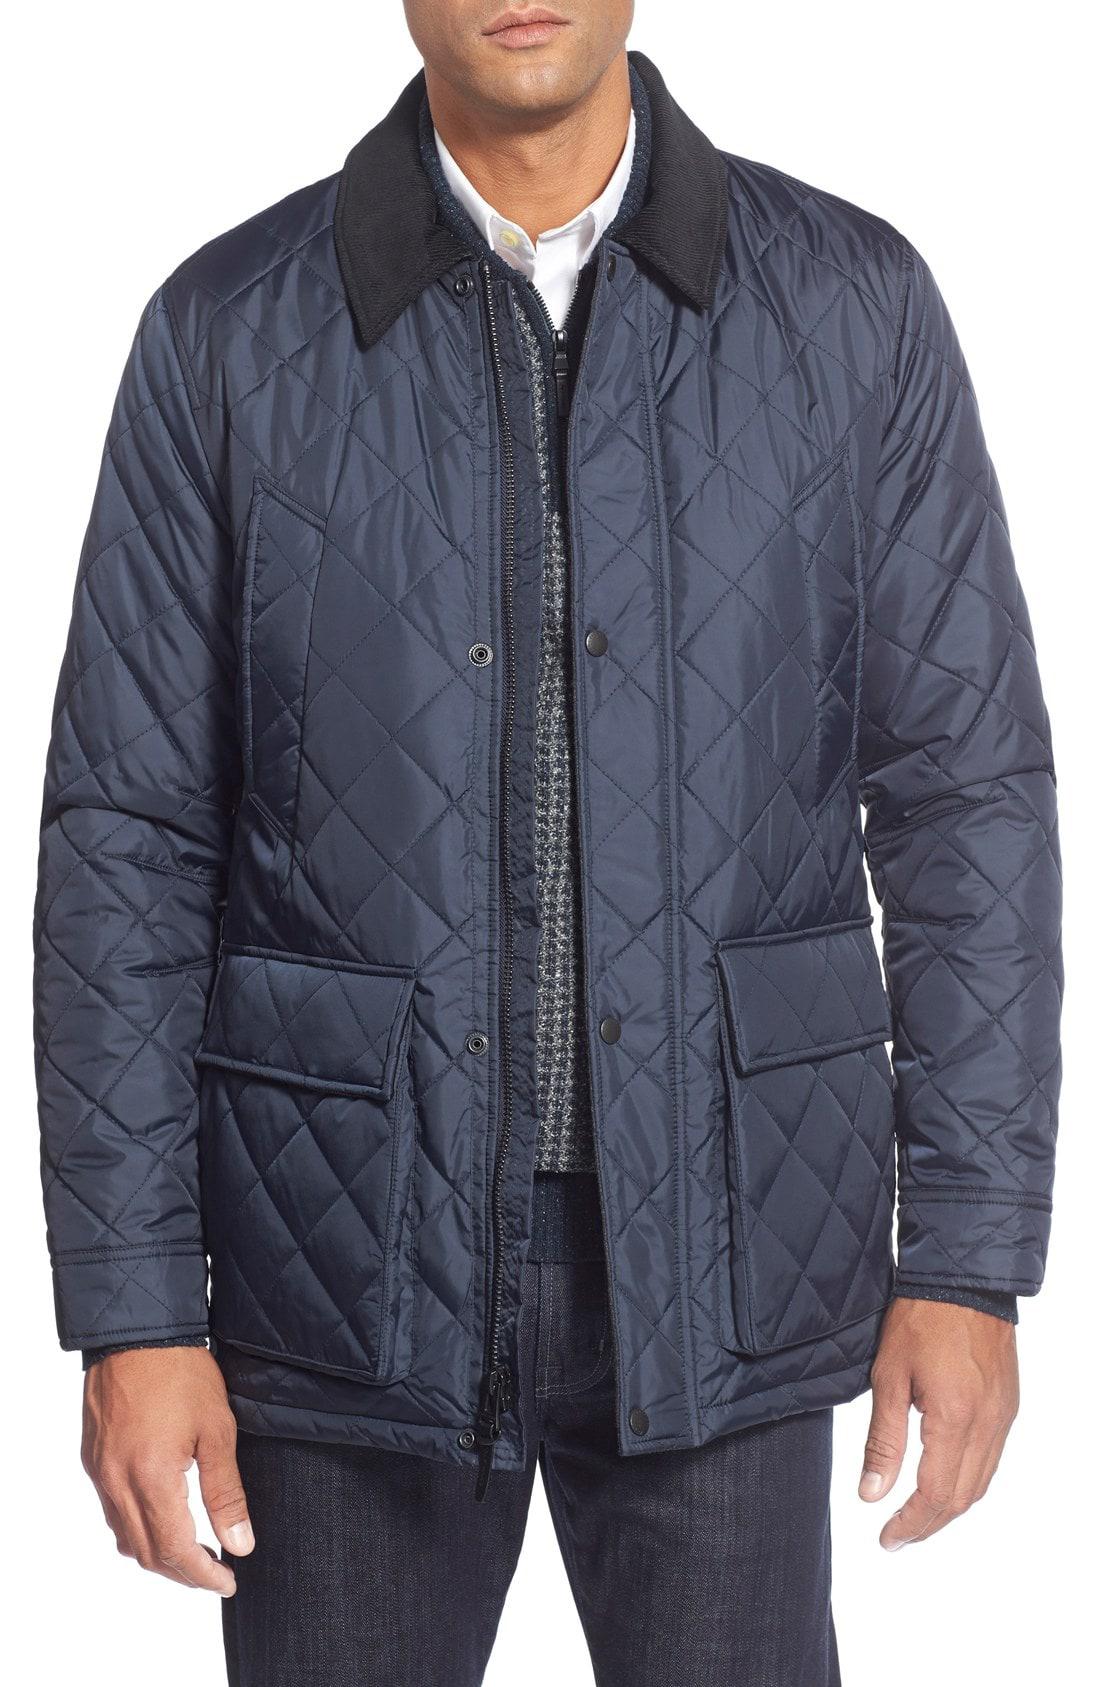 Cole Haan Corduroy Quilted Jacket in Gray for Men - Lyst